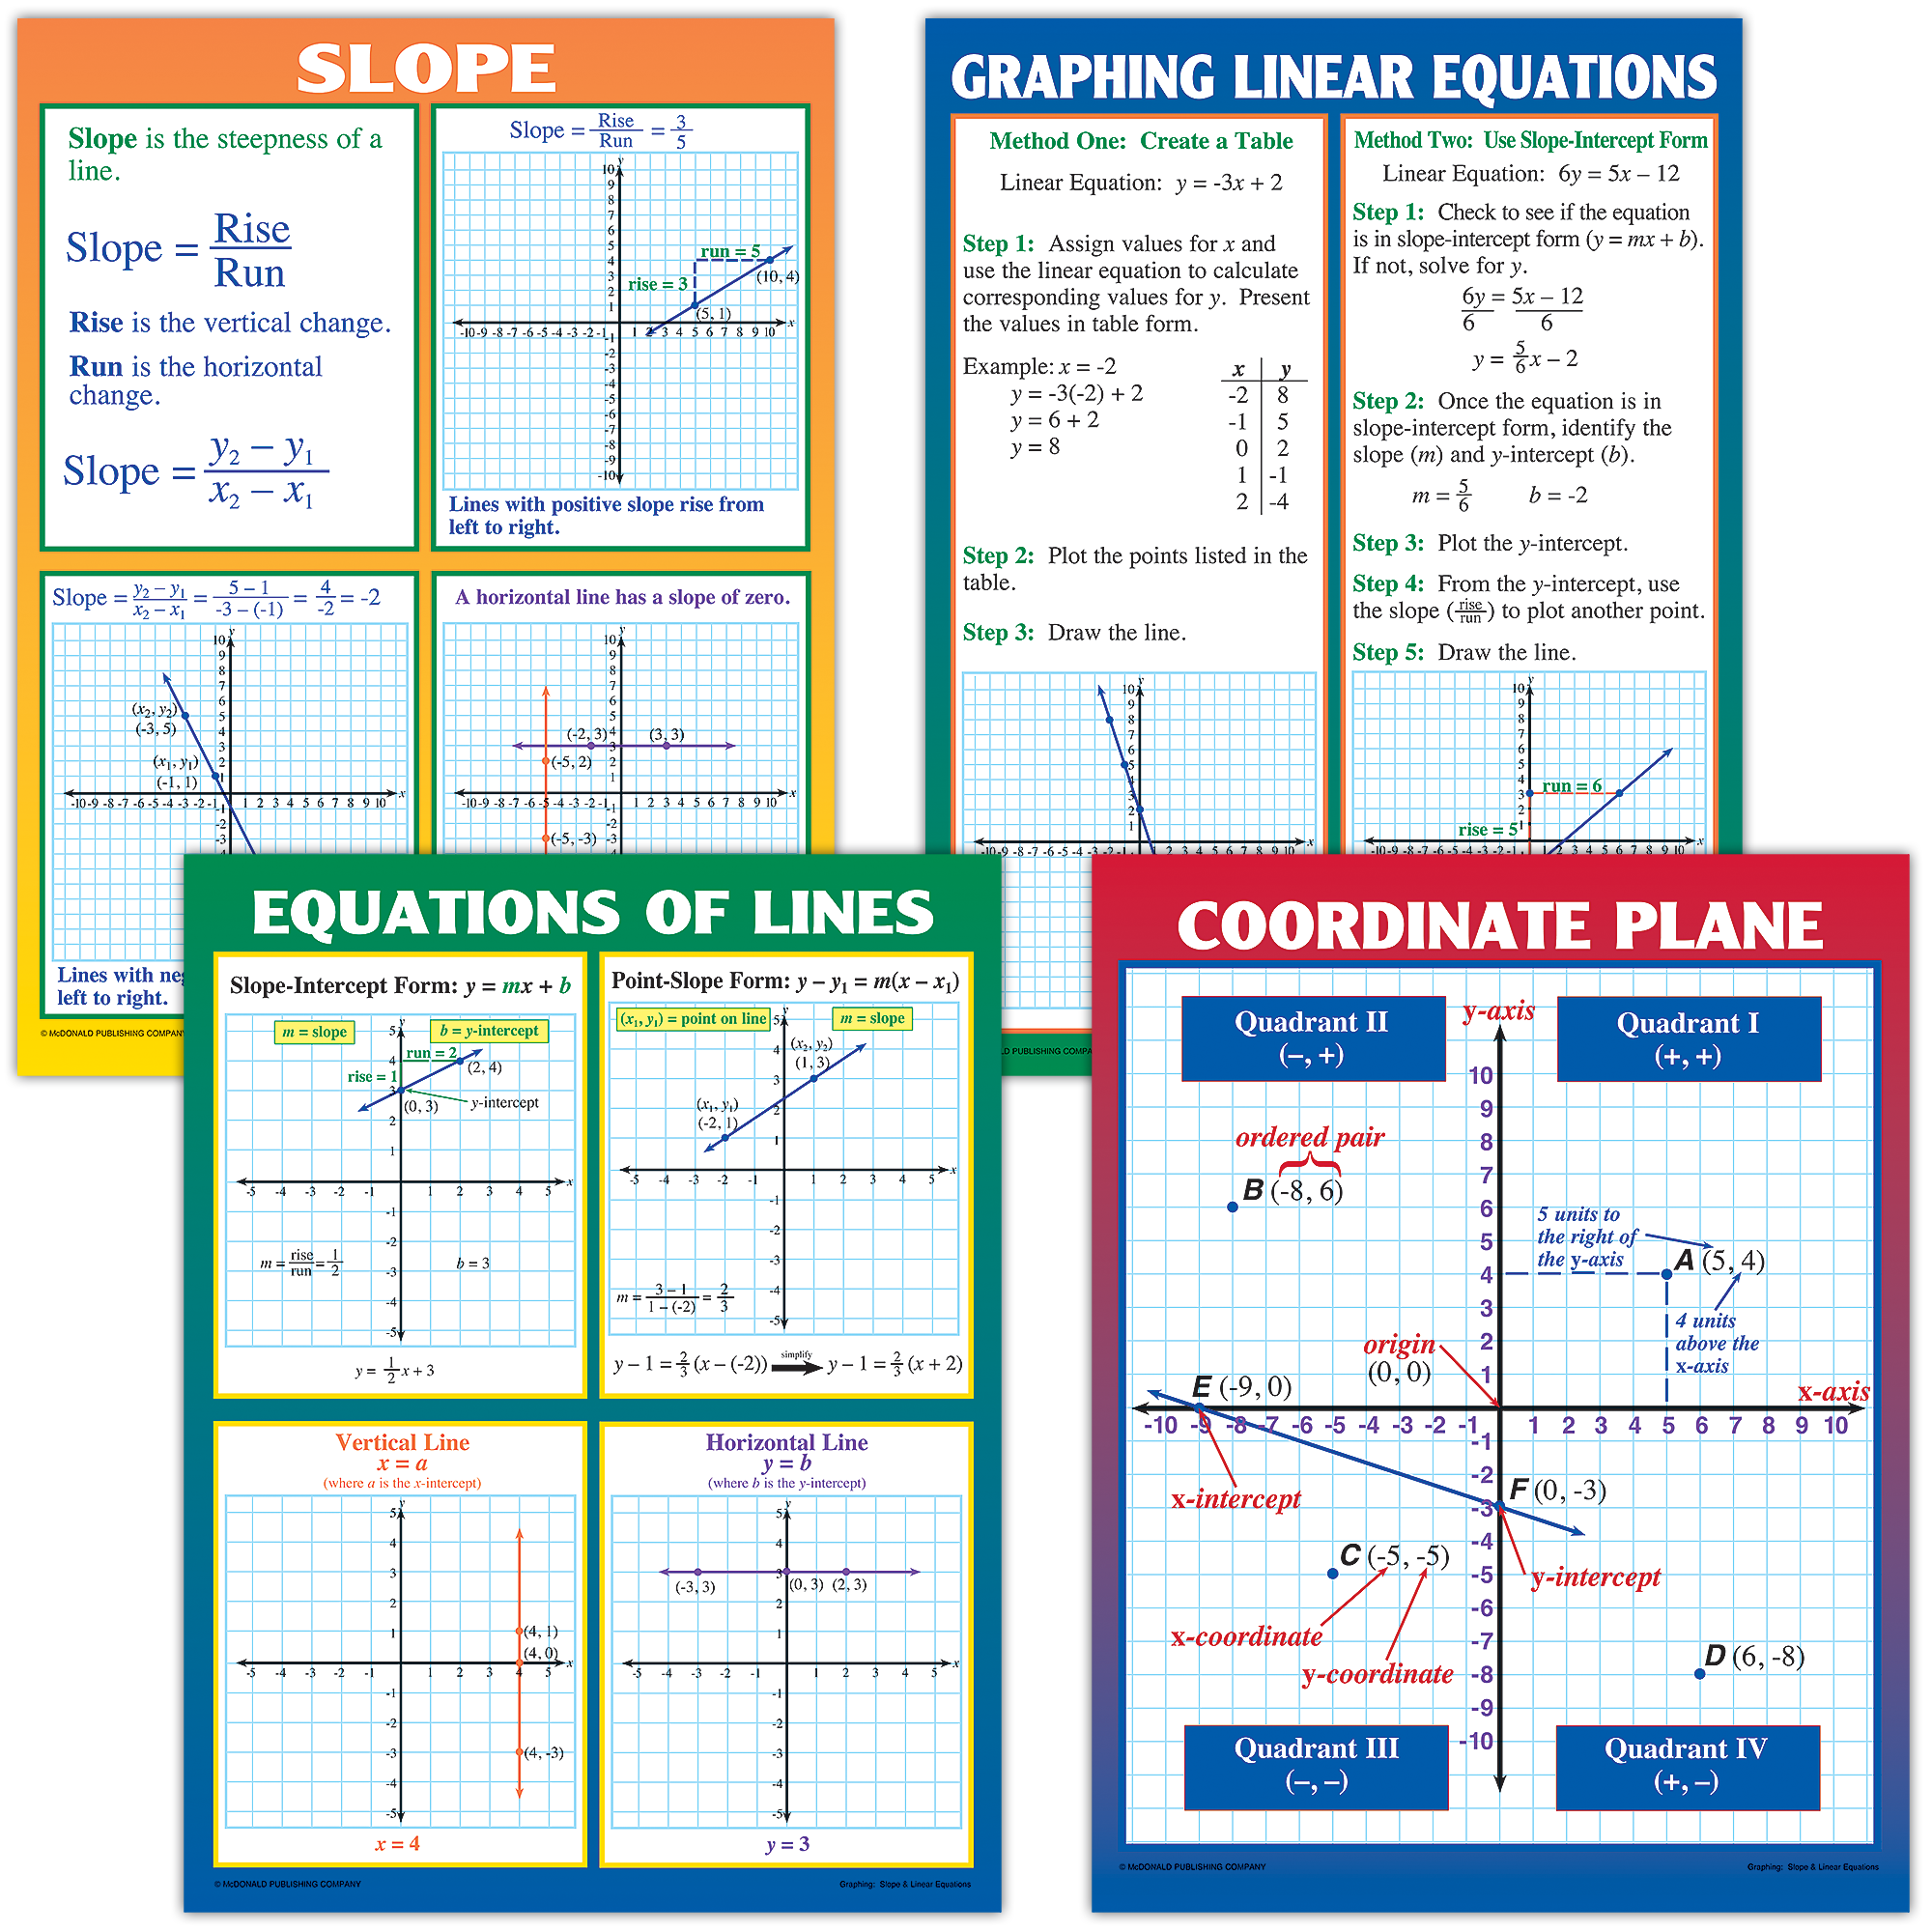 These informative posters help teach students about coordinate planes, equations of lines, slope, and methods for graphing linear equations. Package includes 4 posters, 4 reproducible activity sheets, and a teacher’s guide.